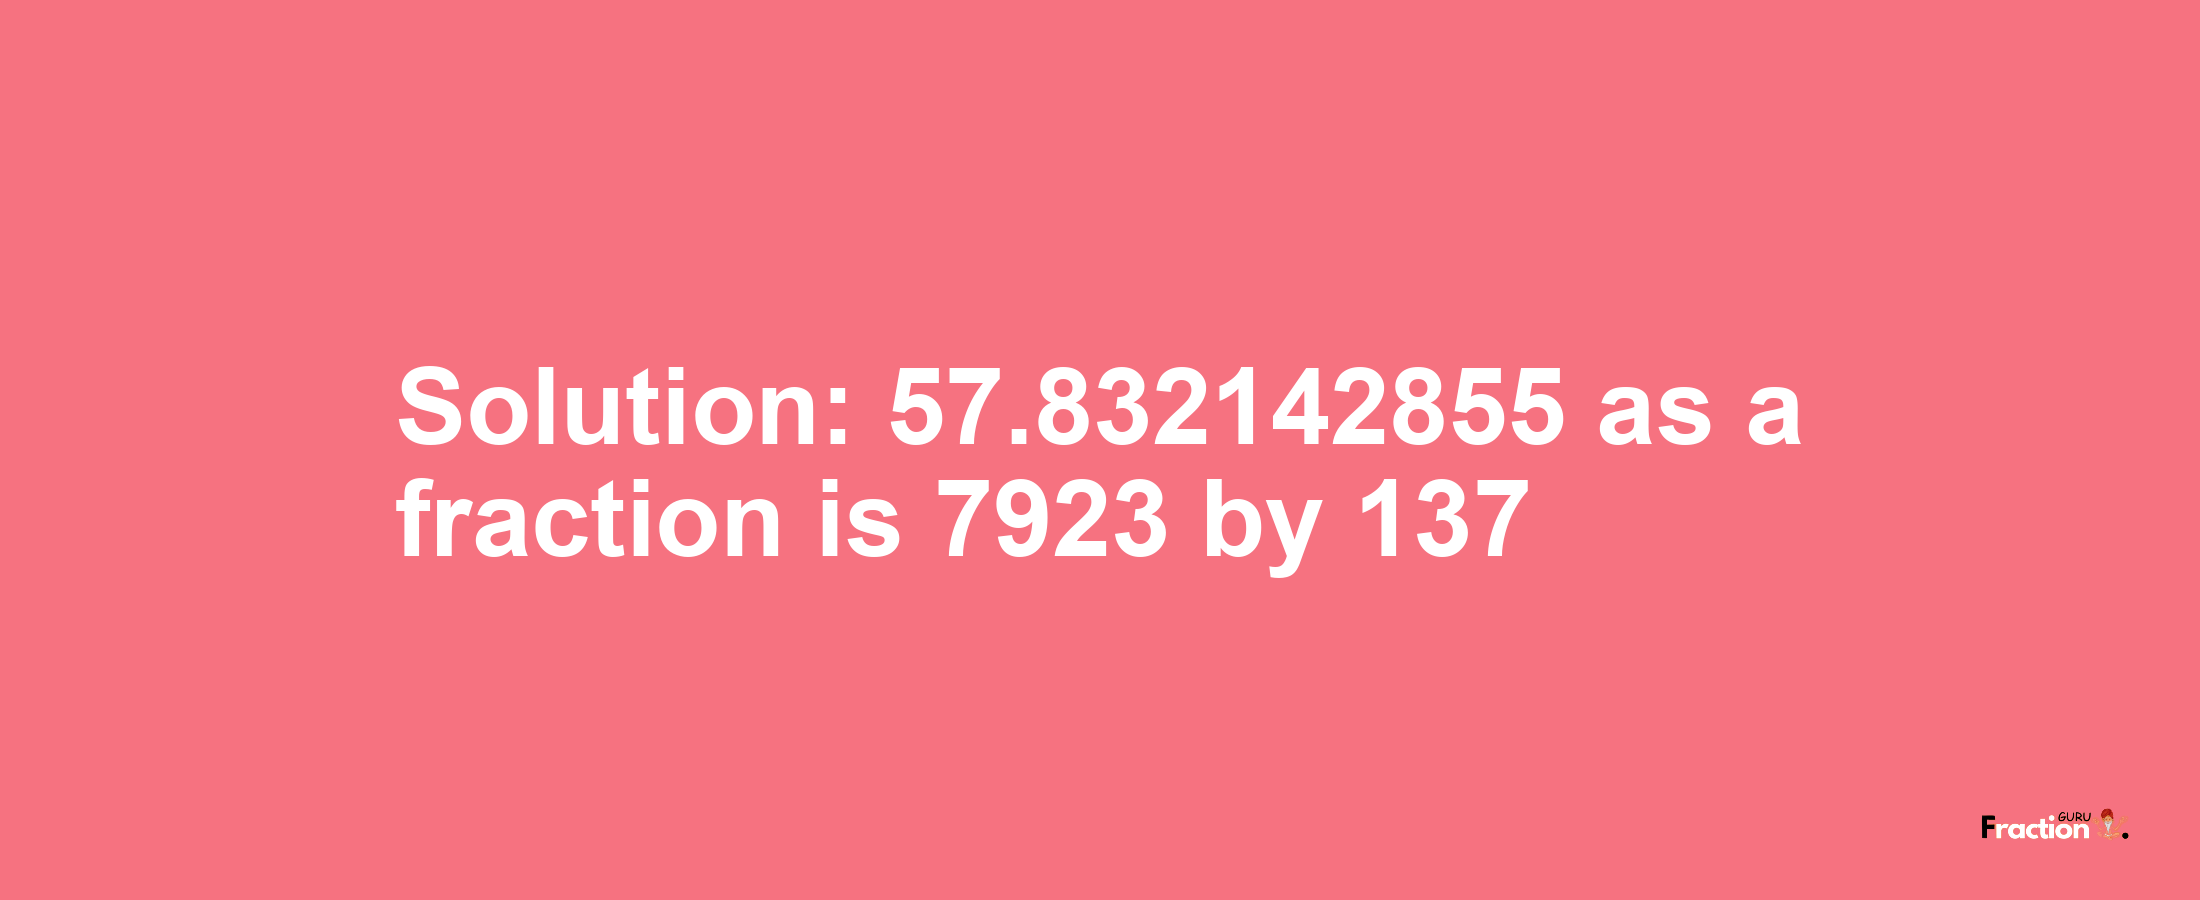 Solution:57.832142855 as a fraction is 7923/137